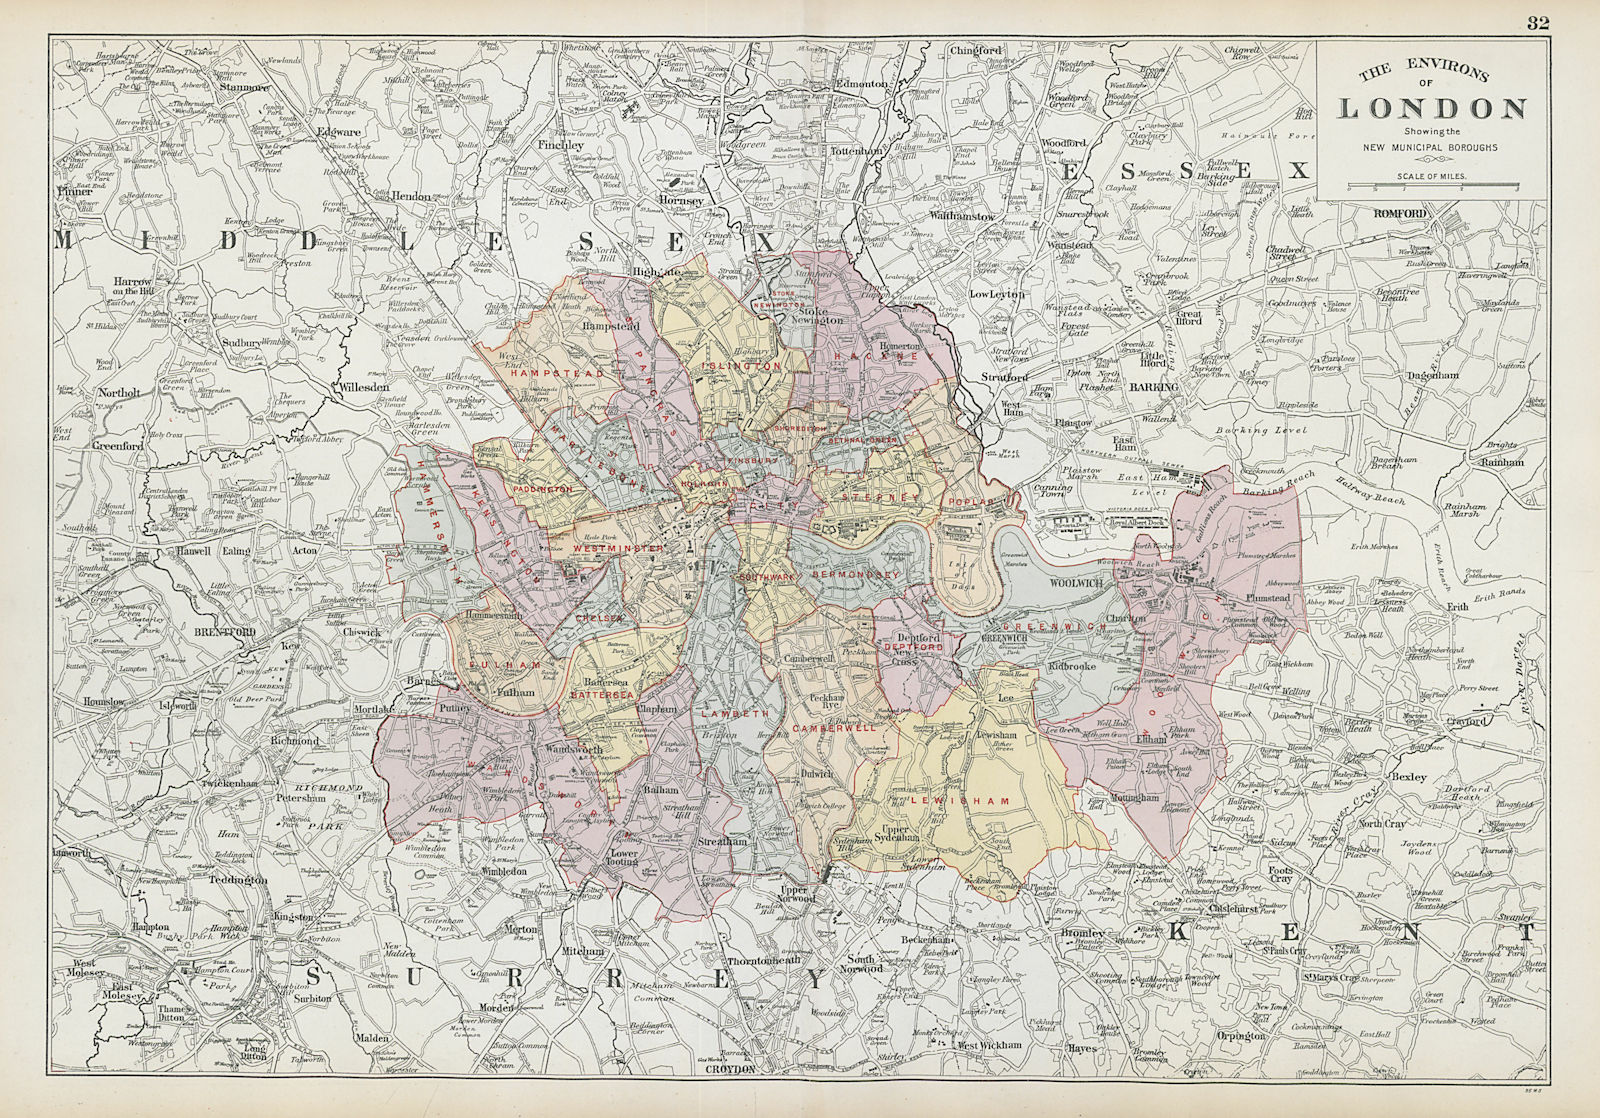 GREATER LONDON ENVIRONS. Showing new Municipal Boroughs. BACON 1906 old map